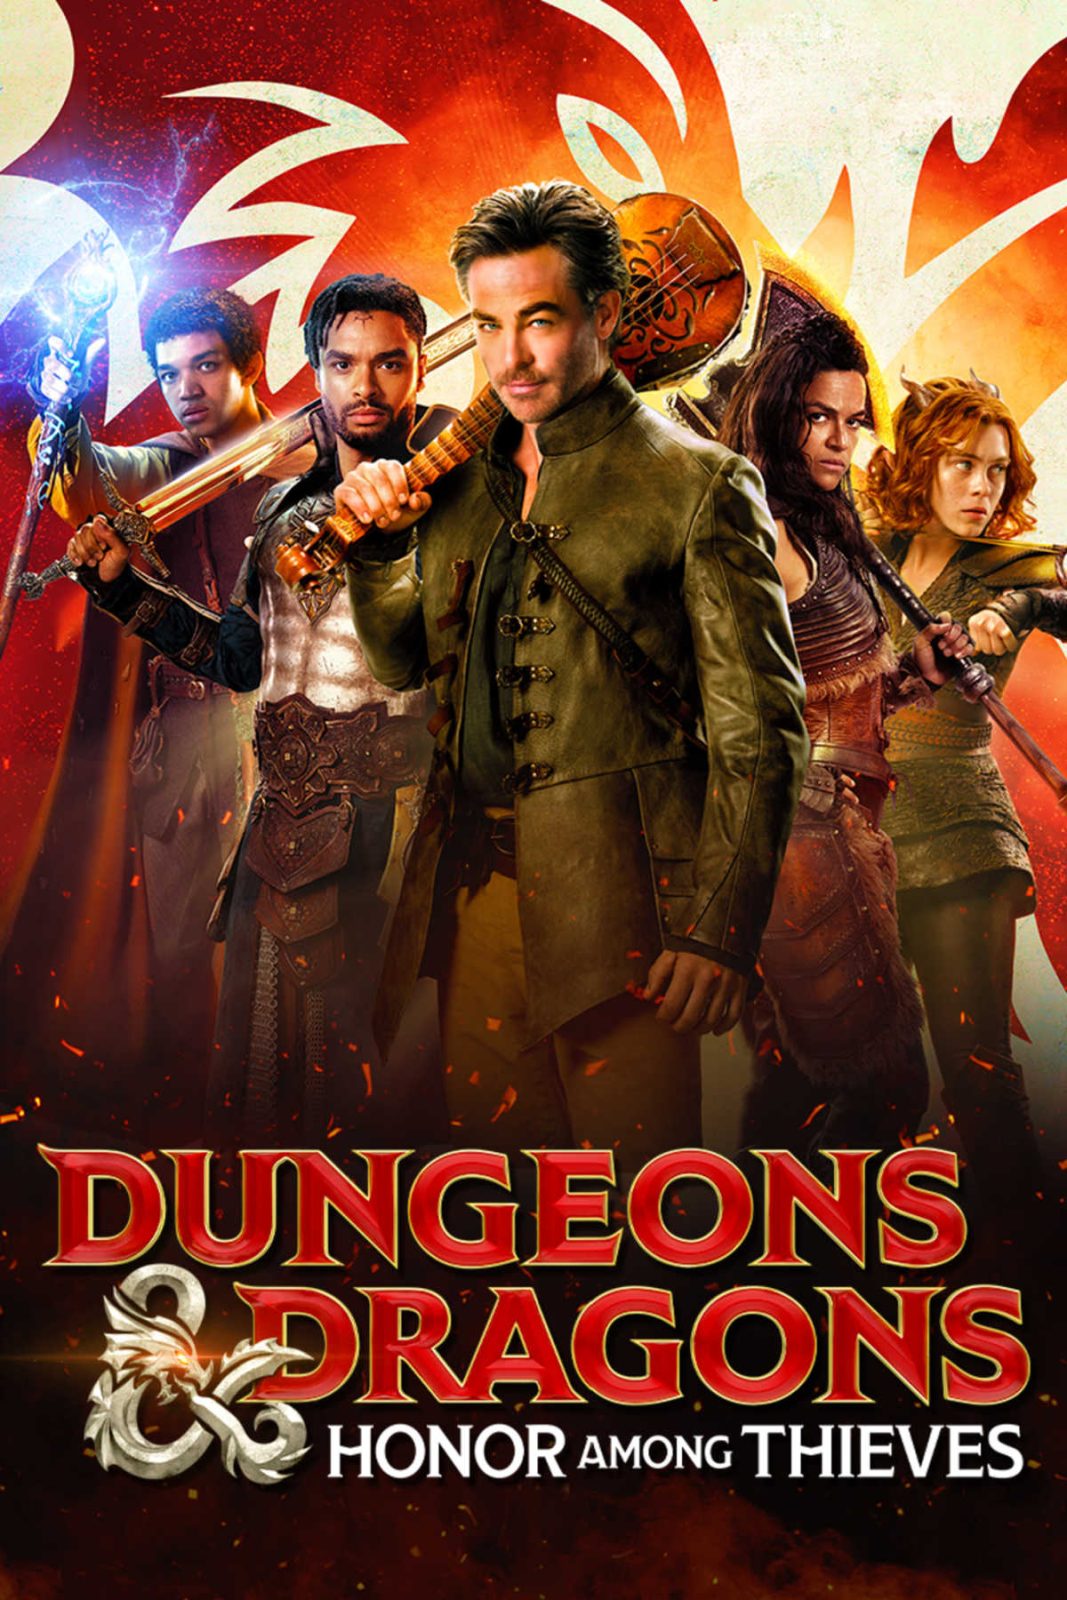 Dungeons & Dragons: Honor Among Thieves is a fantasy adventure film based on the popular role-playing game known as DnD.